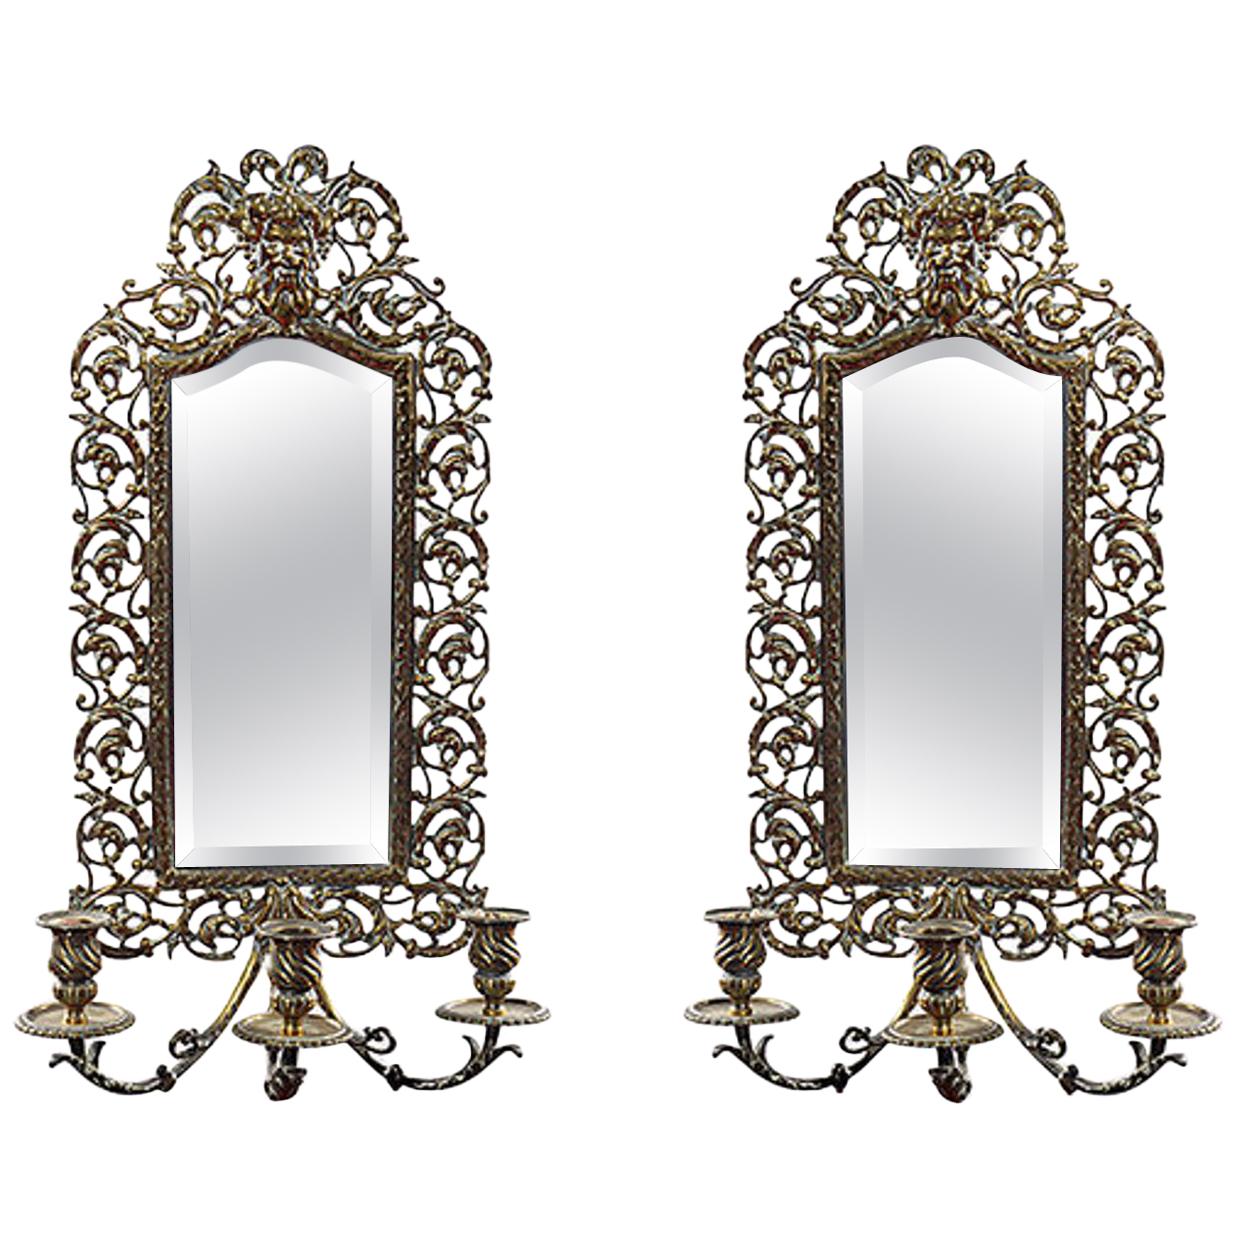 Pair of 19th Century Brass Girandole Wall Mirrors   For Sale